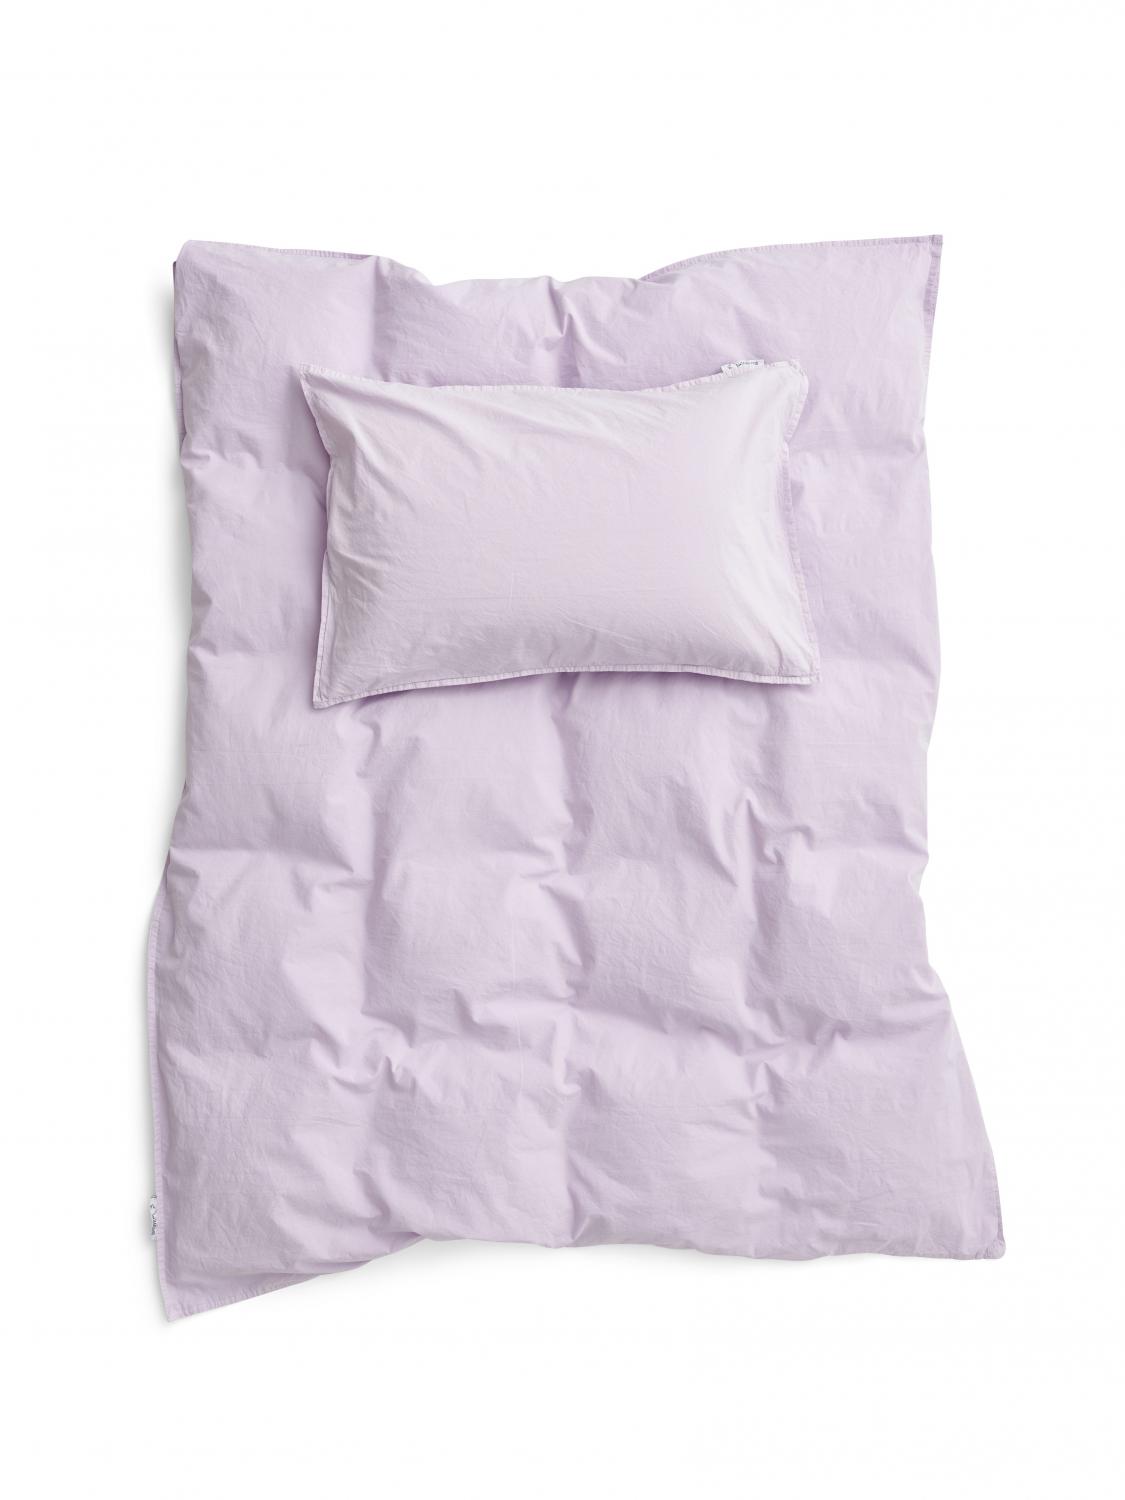 Baby Duvet Cover Crinkle Lilac Ab Smaland